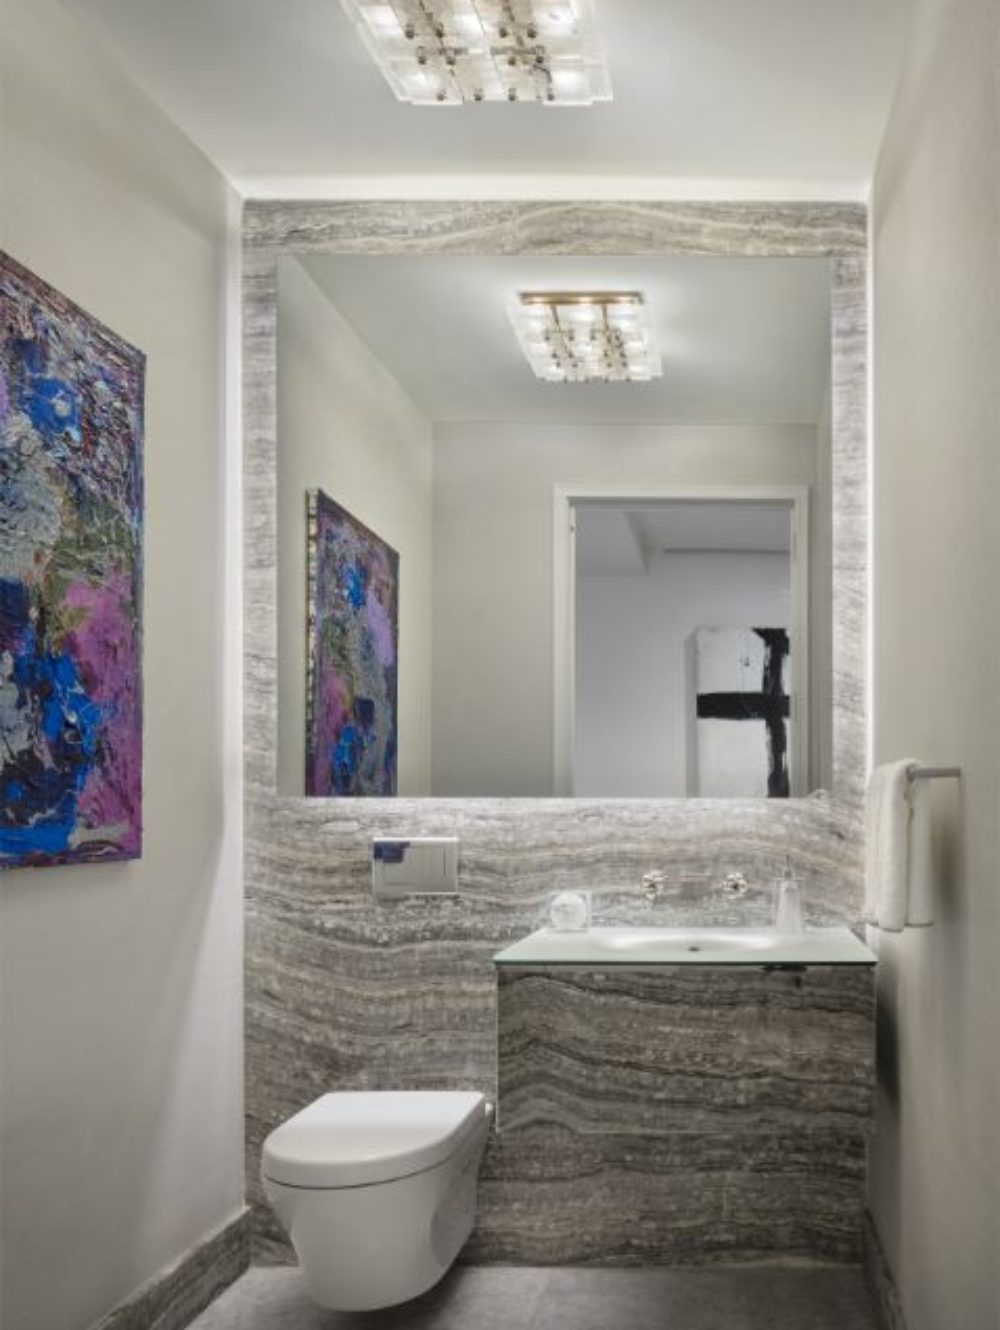 Interior view of 35 Hudson Yards residence powder room in NYC. Includes white walls and wood mirror and sink area.